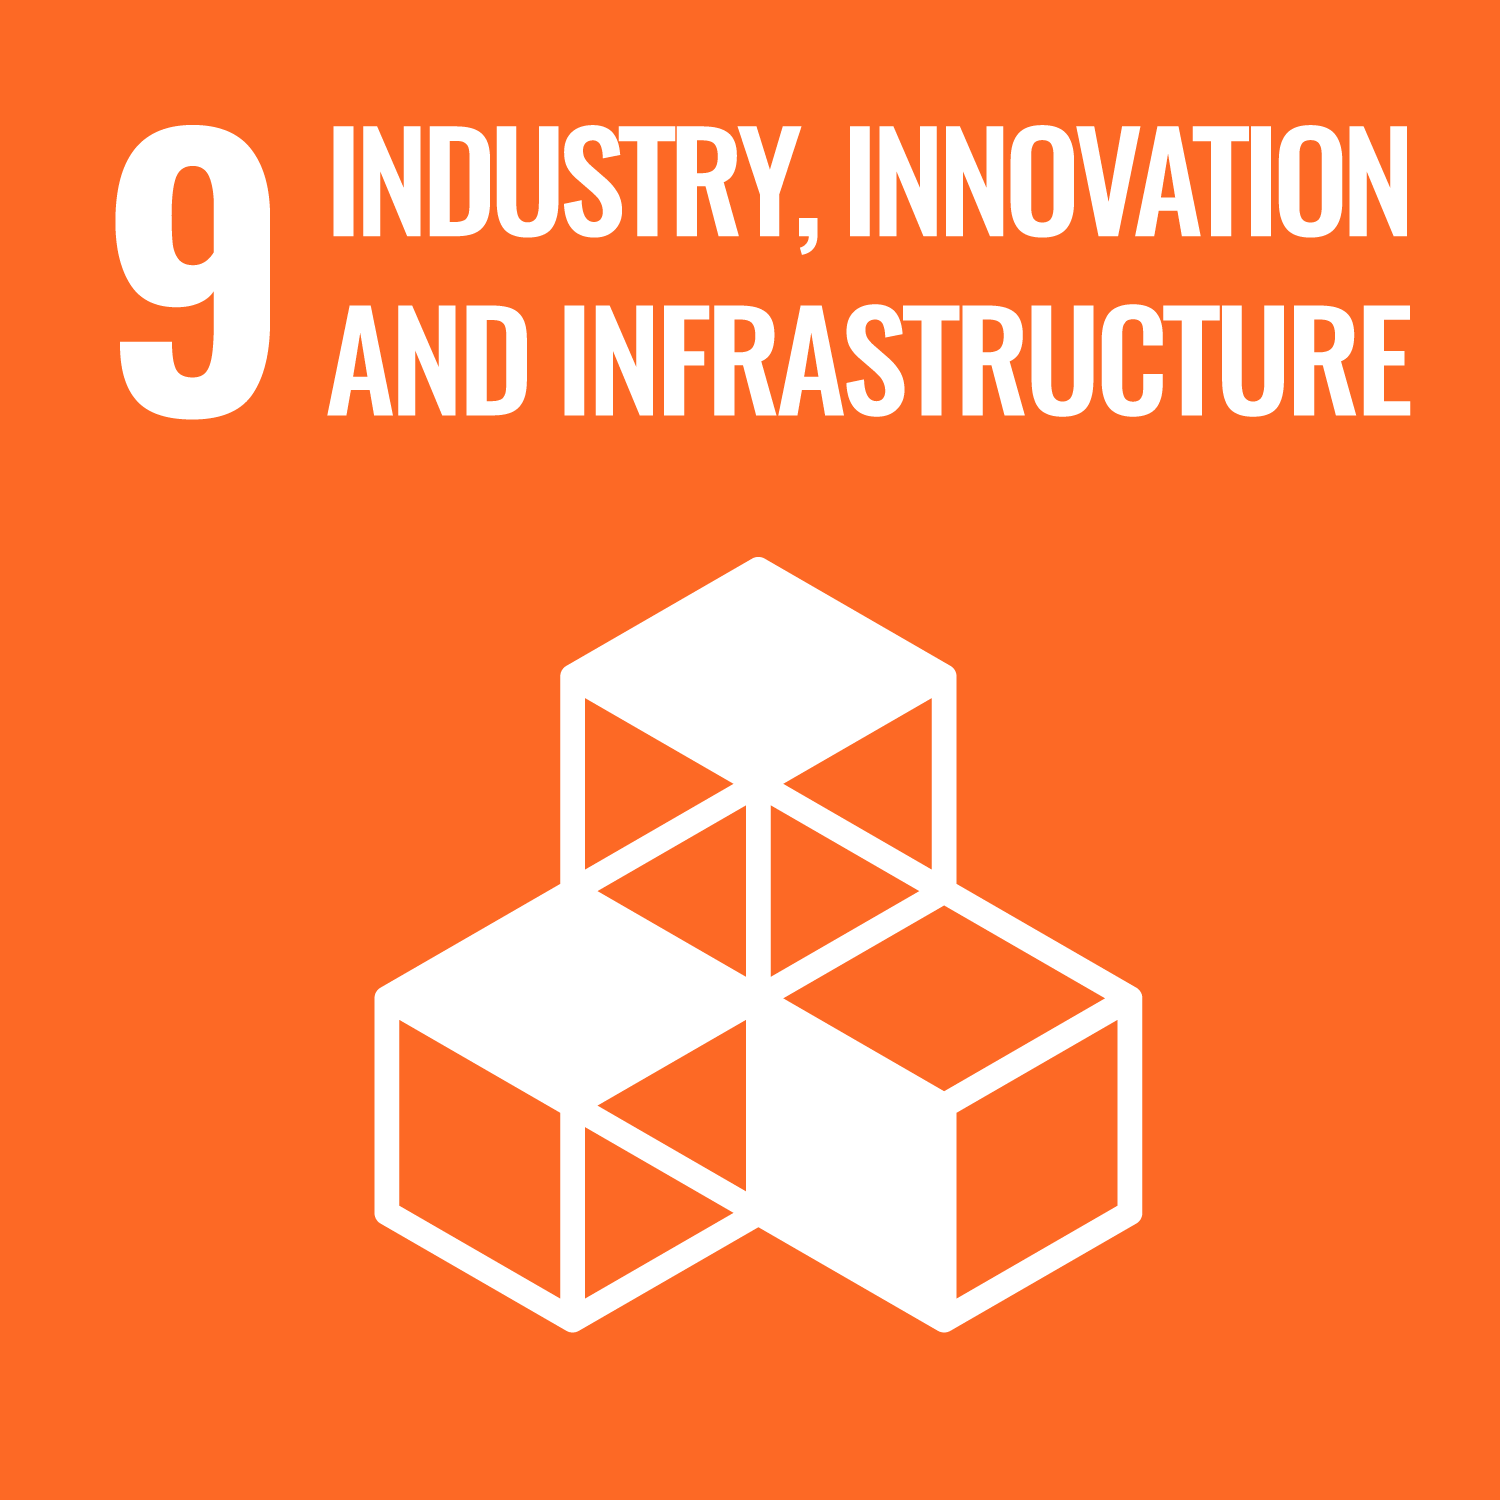 Related UN Sustainable Development Goals icon 5